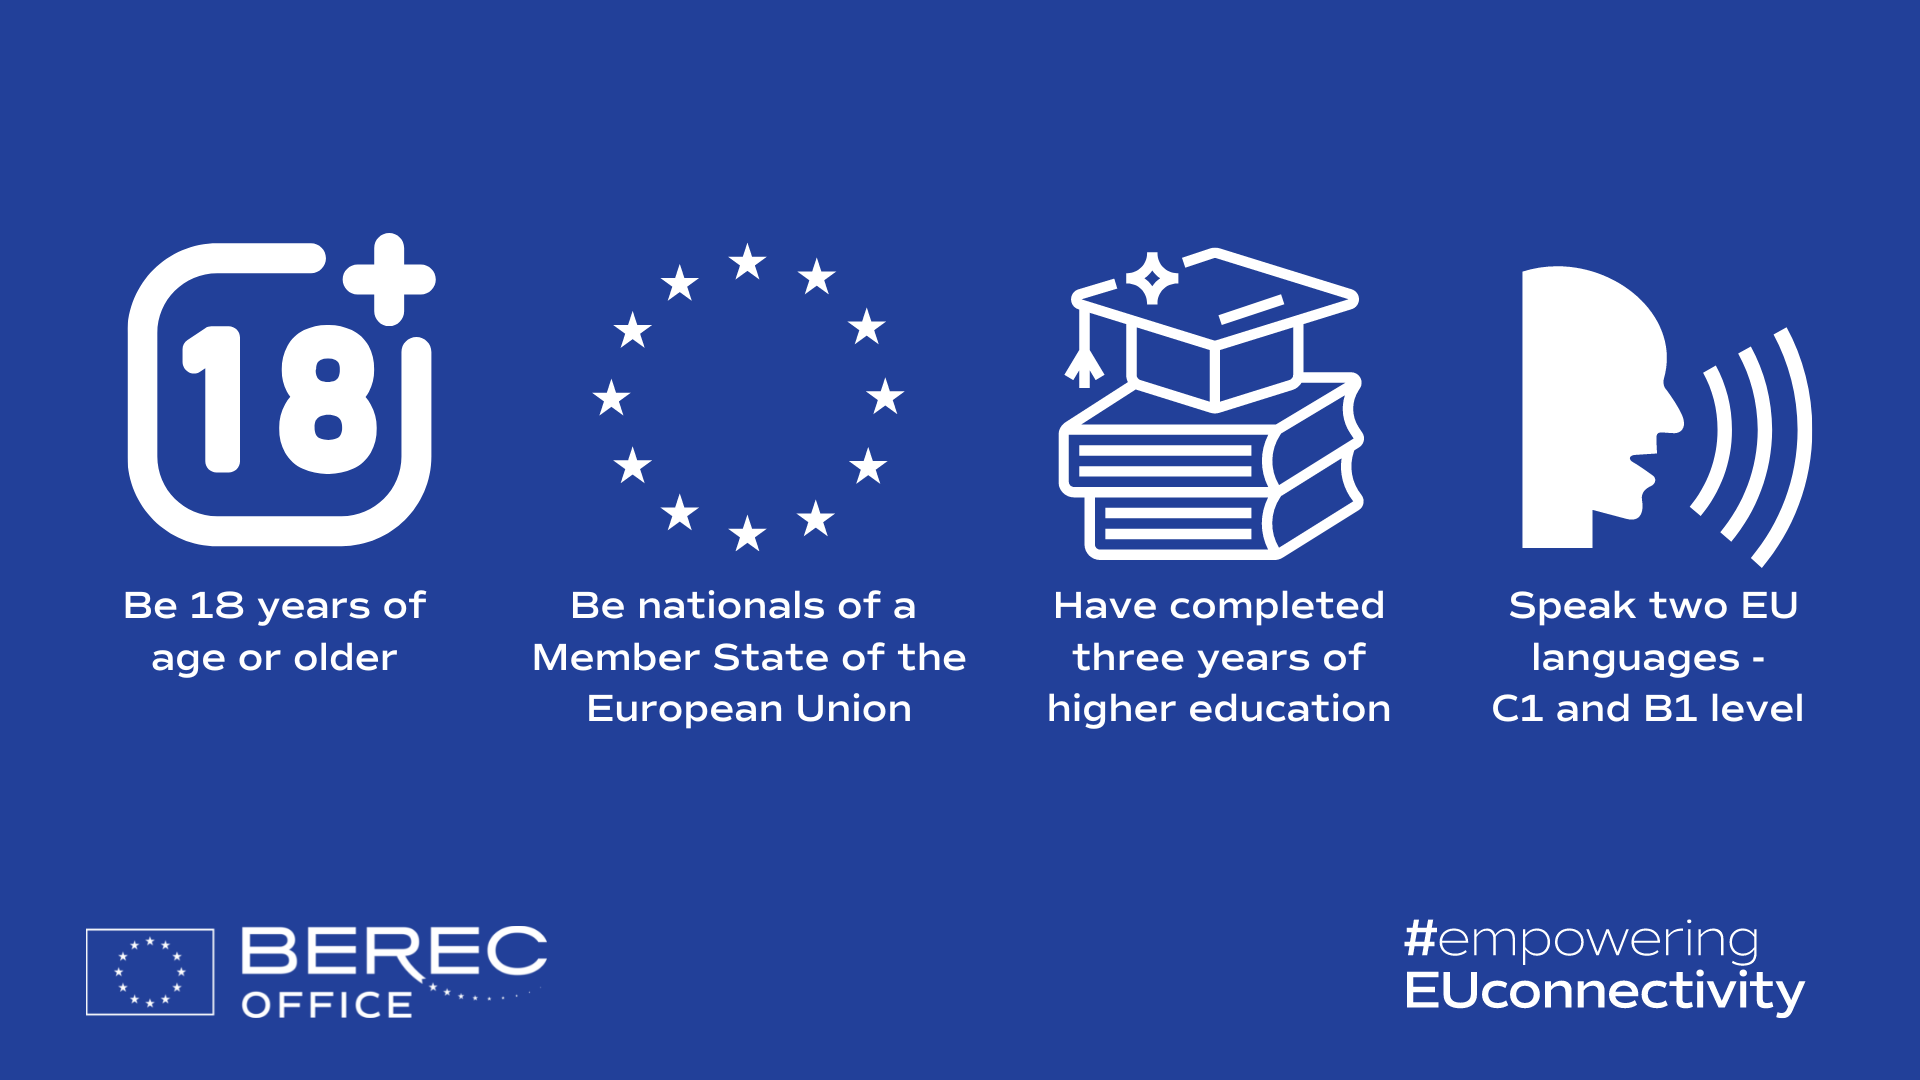 The image includes a visualisation of the four basic requirements on a blue background related to the BEREC Office Traineeship Programme, available in text form below the image